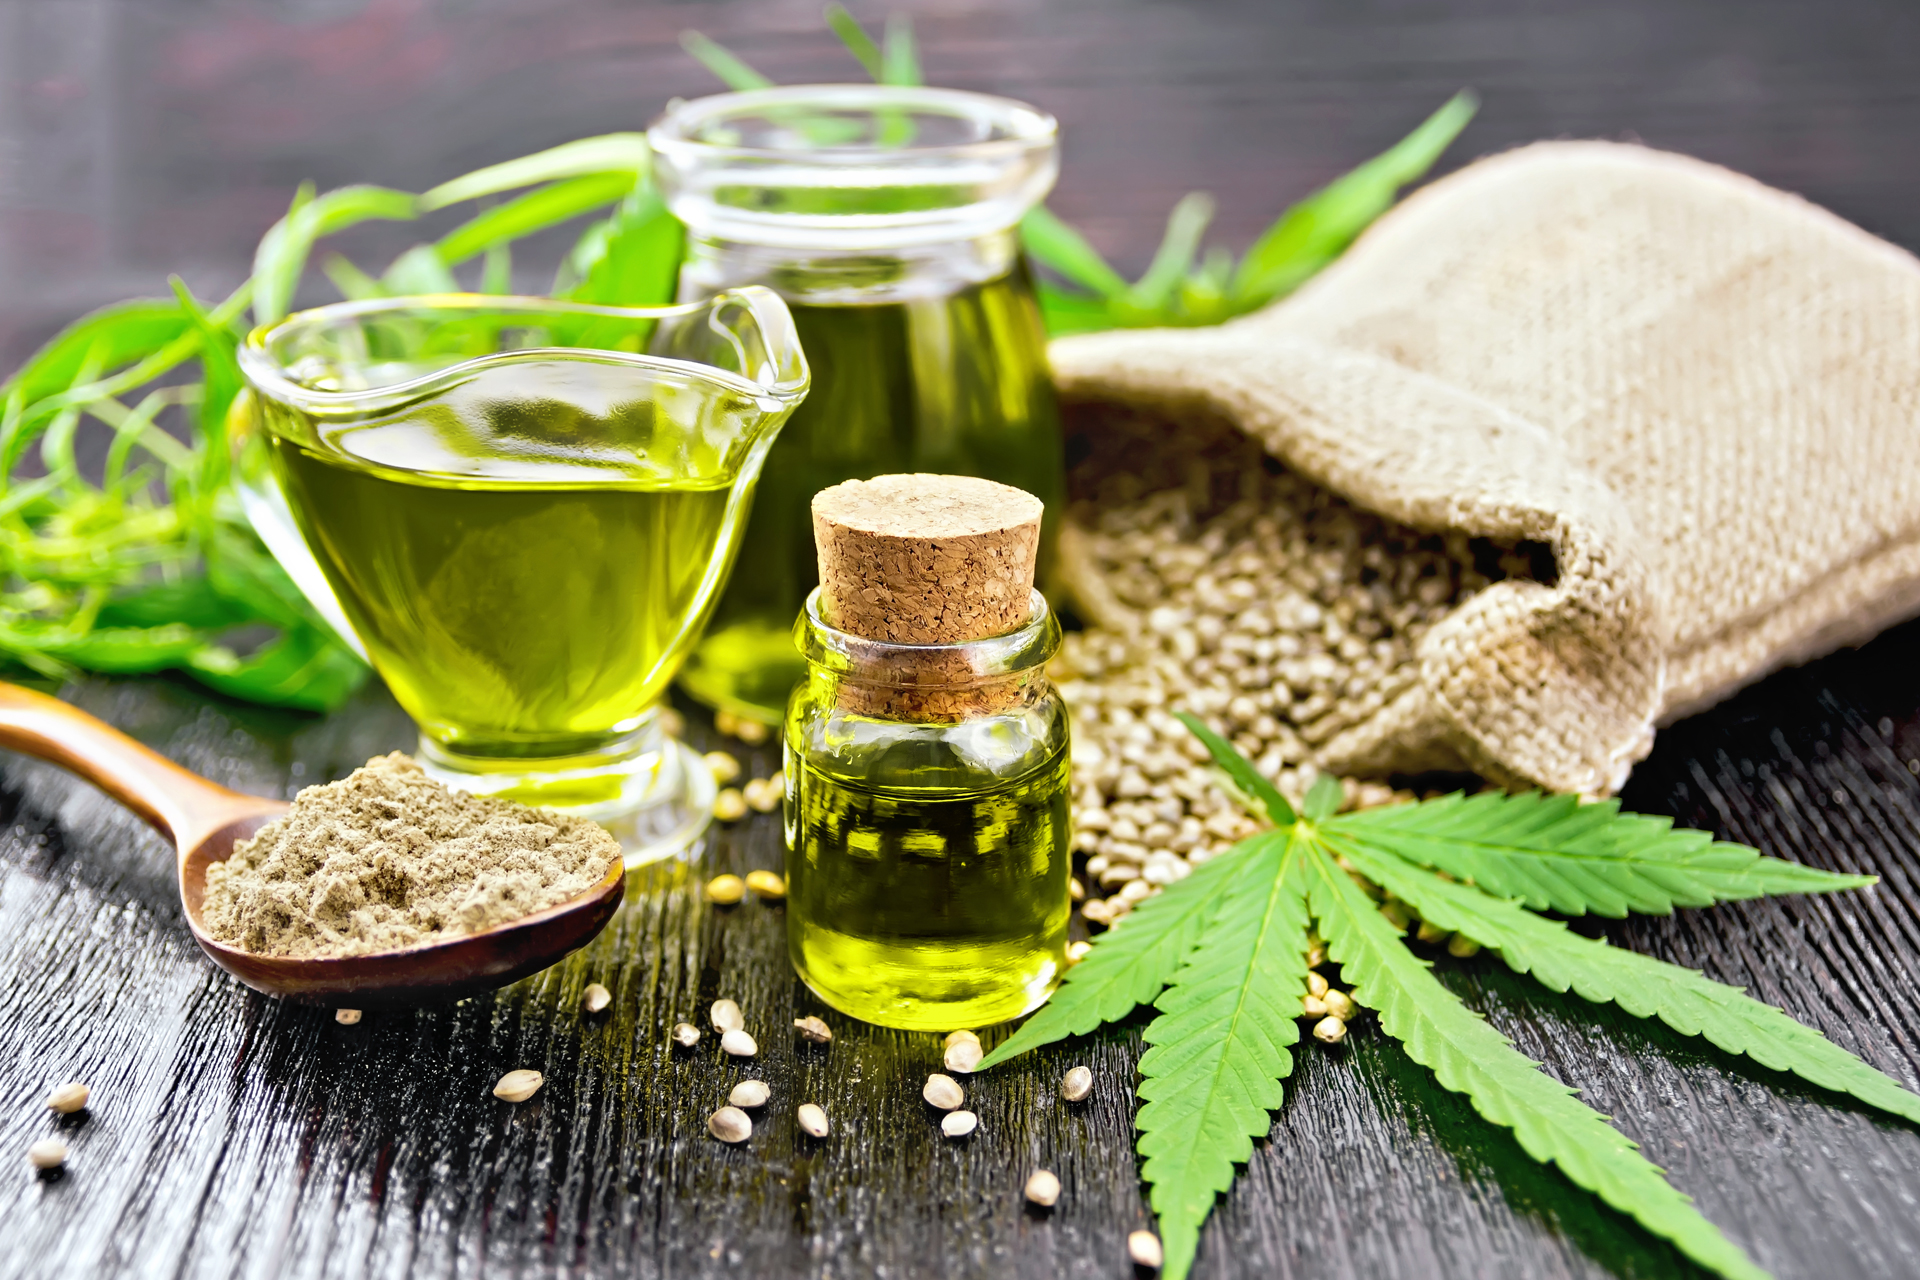 Find The Common And Unique Ways To Use CBD Oil